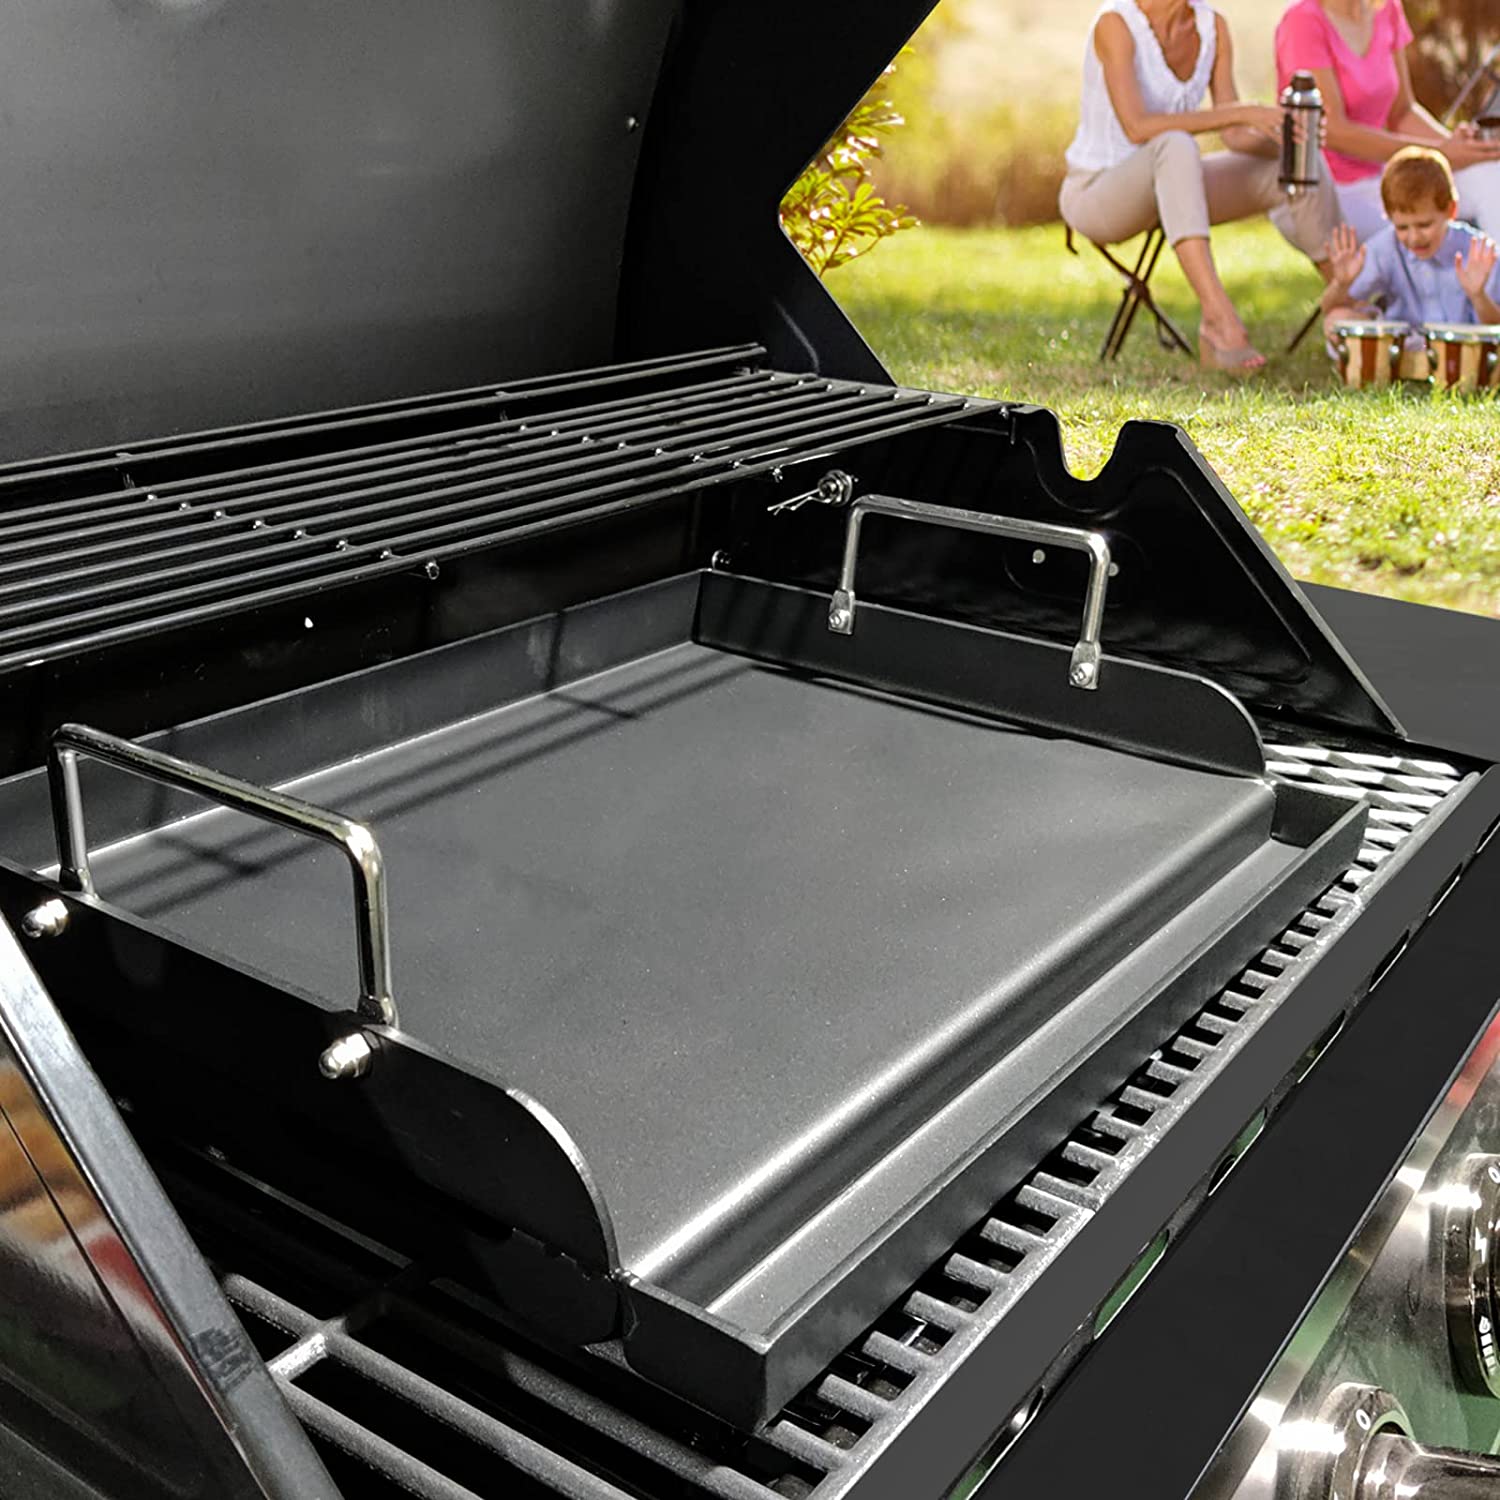  Uniflasy Universal Fry Griddle Flat Top Plate 17 x13” Metal Cooking  Griddle Pan Fits Weber Nexgrill Charbroil Kenmore Camp Chef, Grill Master,  Dynaglo and Gas Stove/Gas/Charcoal Electric Grill : Patio, Lawn